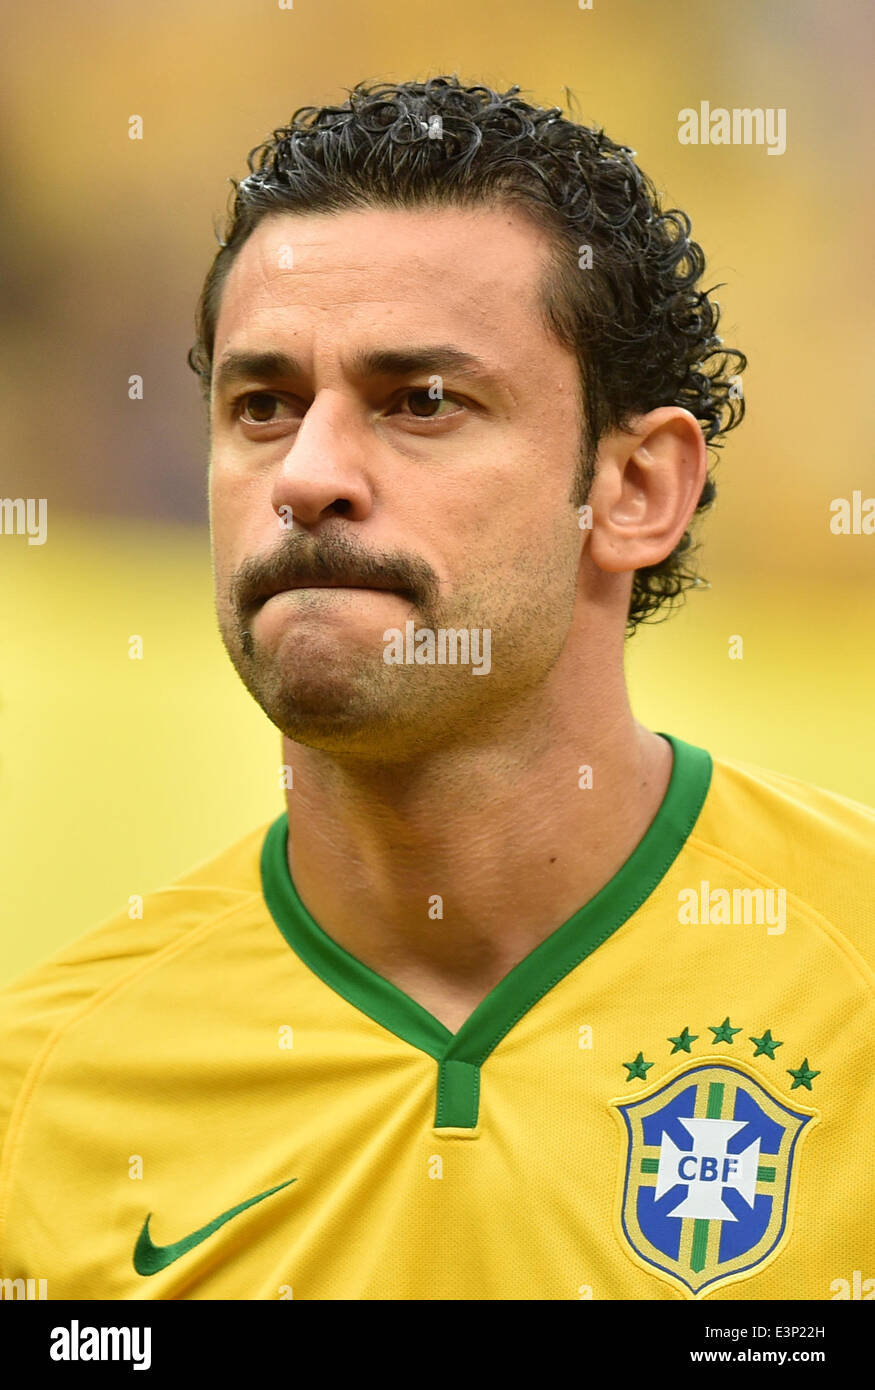 Brasilia, Brazil. 23rd June, 2014. Brazil's Fred before the FIFA World Cup 2014 group A preliminary round match between Cameroon and Brazil at the Estadio Nacional in Brasilia, Brazil, 23 June 2014. Photo: Marius Becker/dpa/Alamy Live News Stock Photo